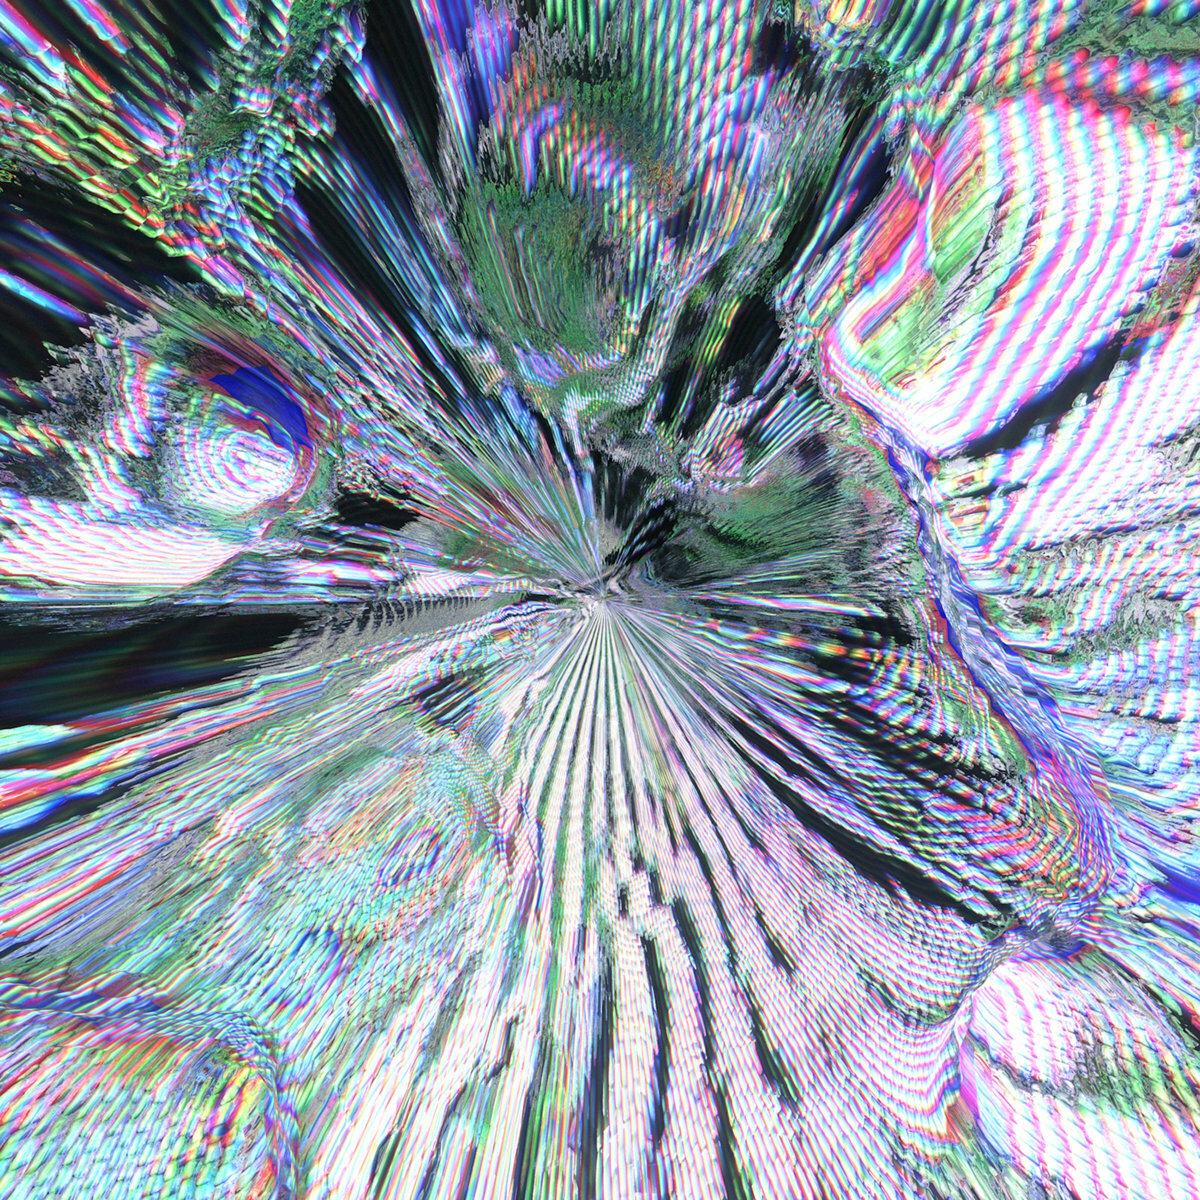 Distorted effect, as if screen error feedback is being pulled into a portal.